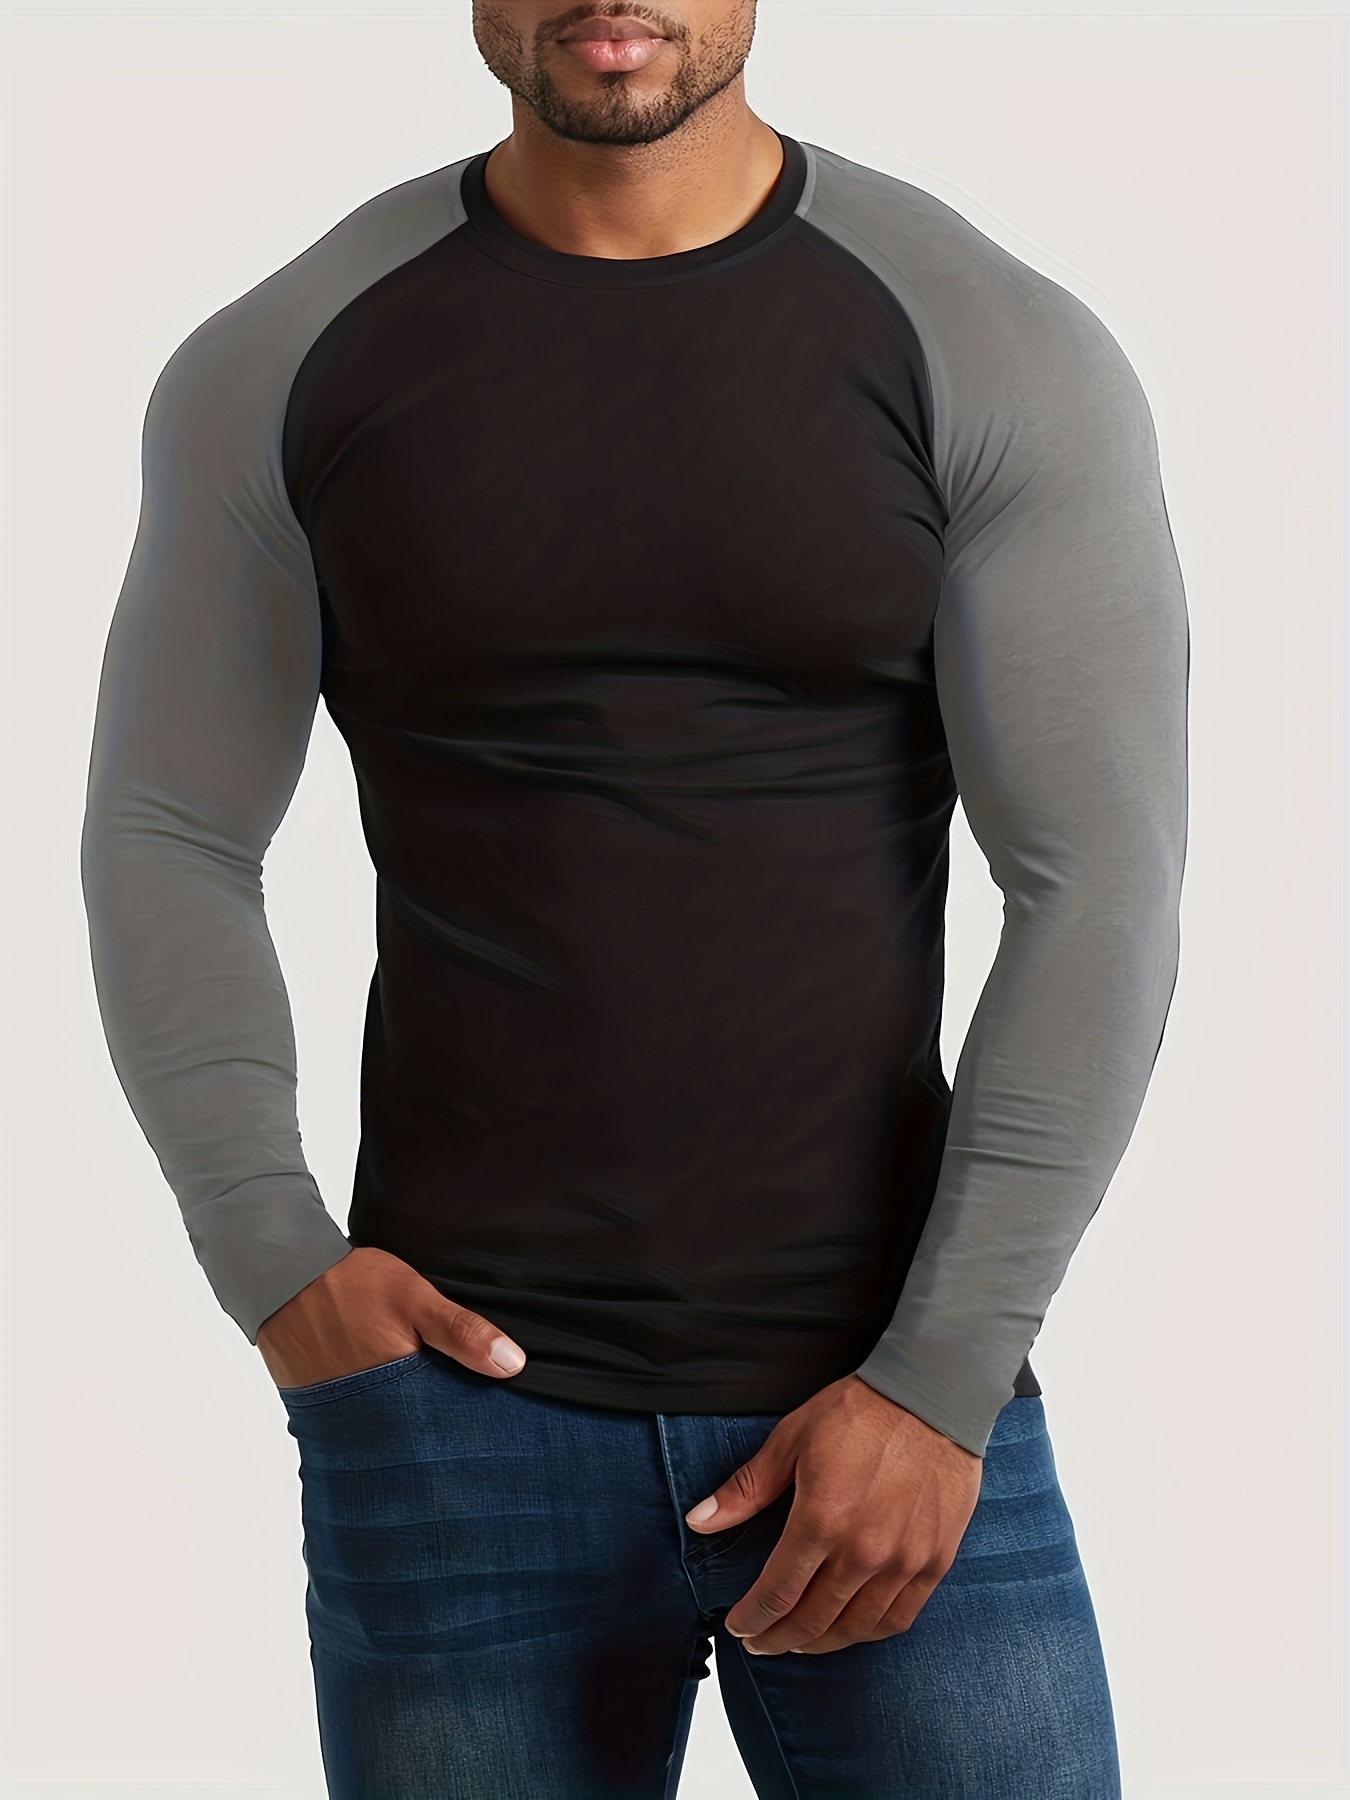 Compression Long Sleeve Men's Gym Fitness Quick Dry T Shirt